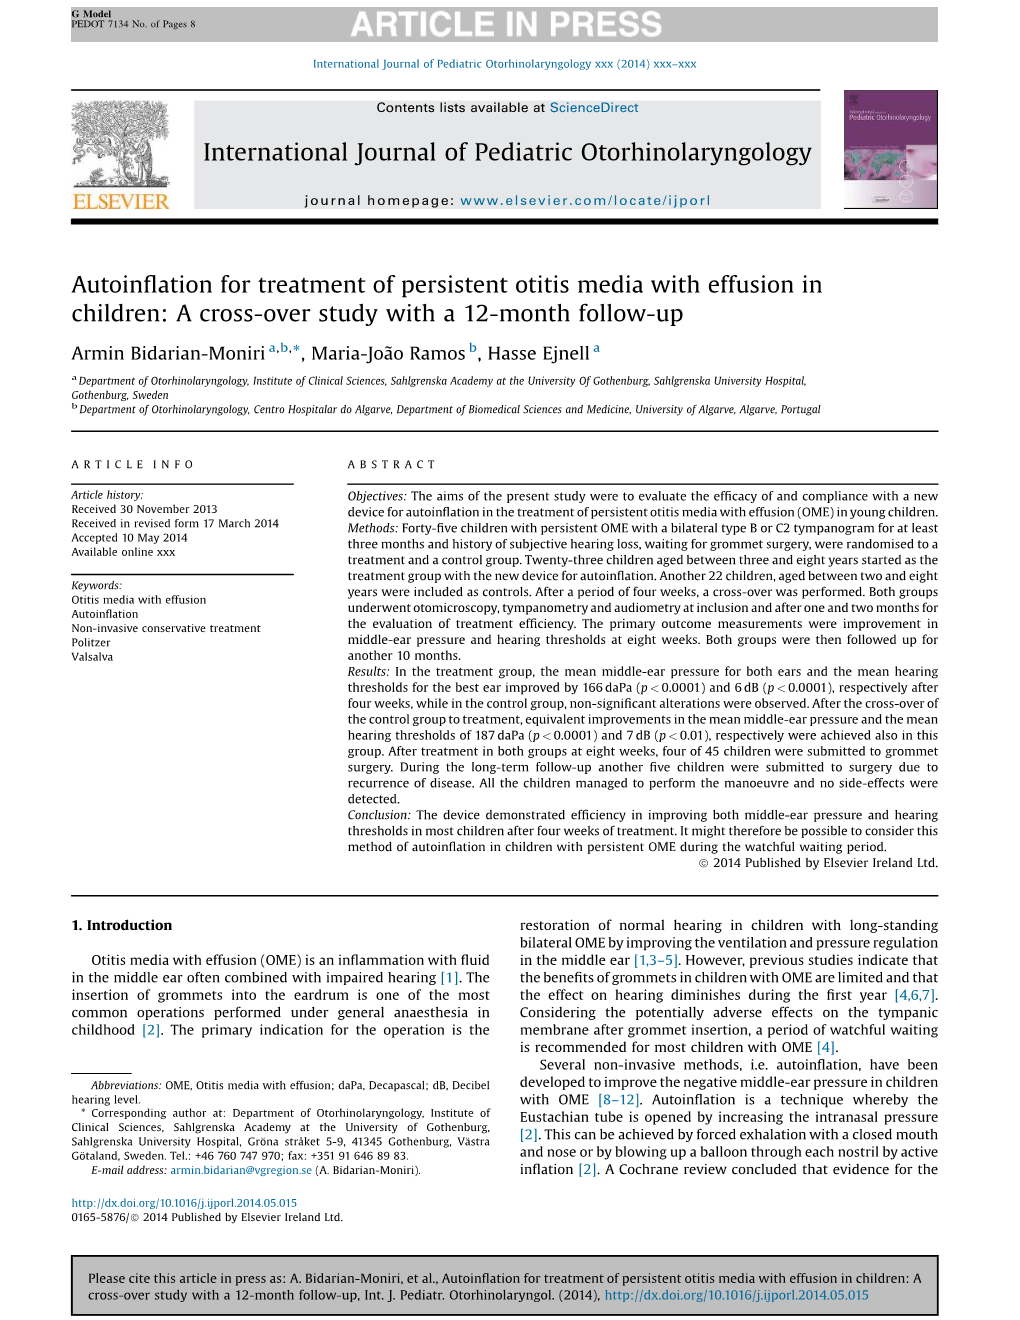 Autoinflation for Treatment of Persistent Otitis Media with Effusion in Children